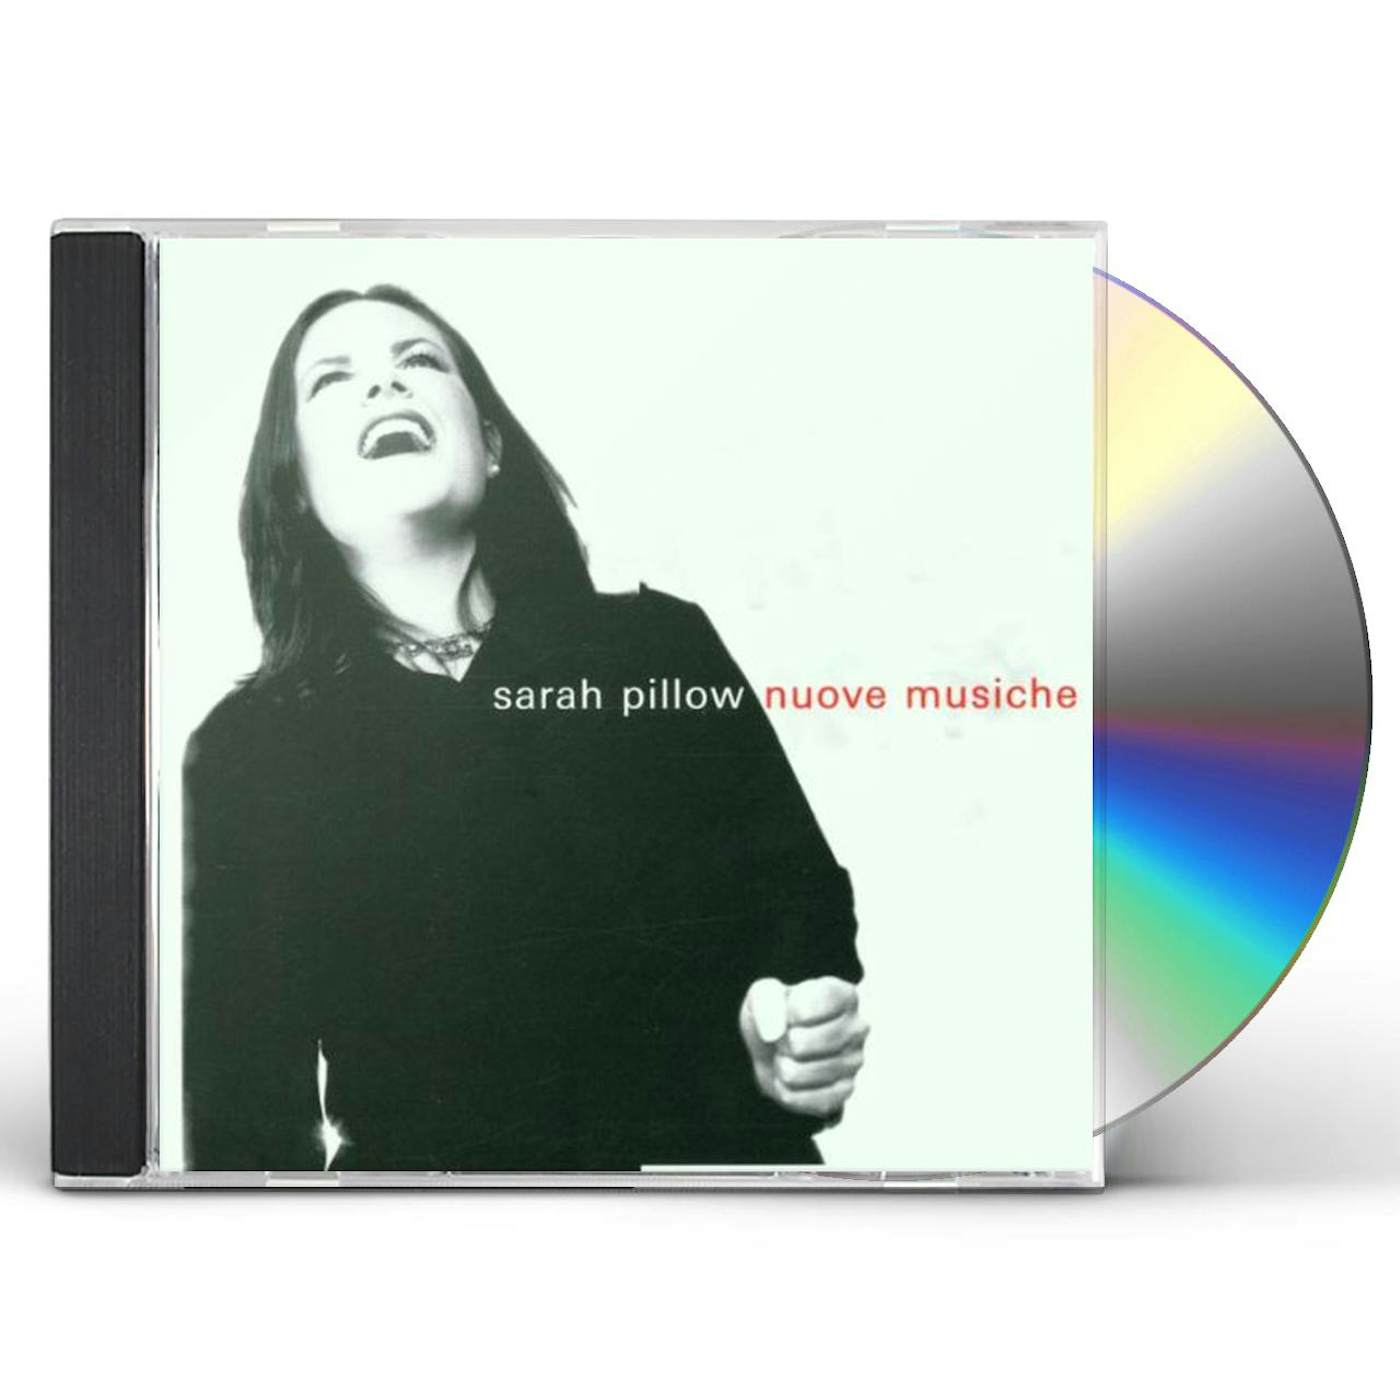 Sarah Pillow NUOVE MUSICHE CD